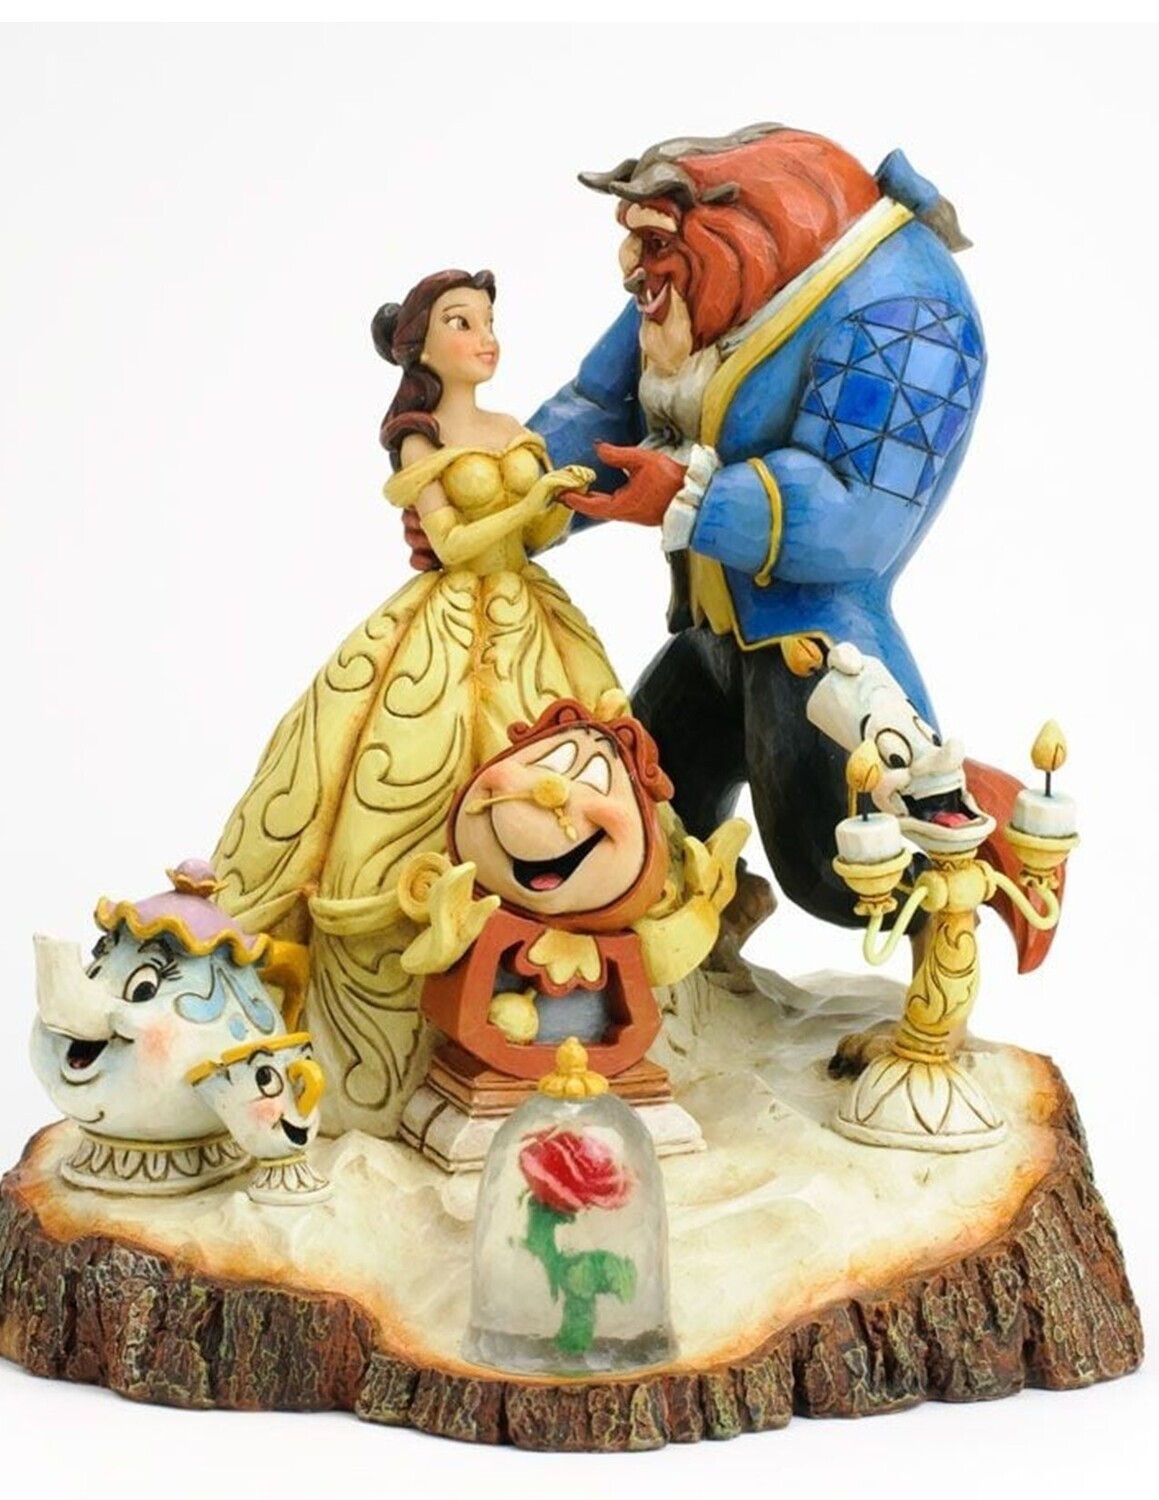 Jim Shore Disney Traditions "Beauty and The Beast - Tale as Old as Time" Figurine (4031487)